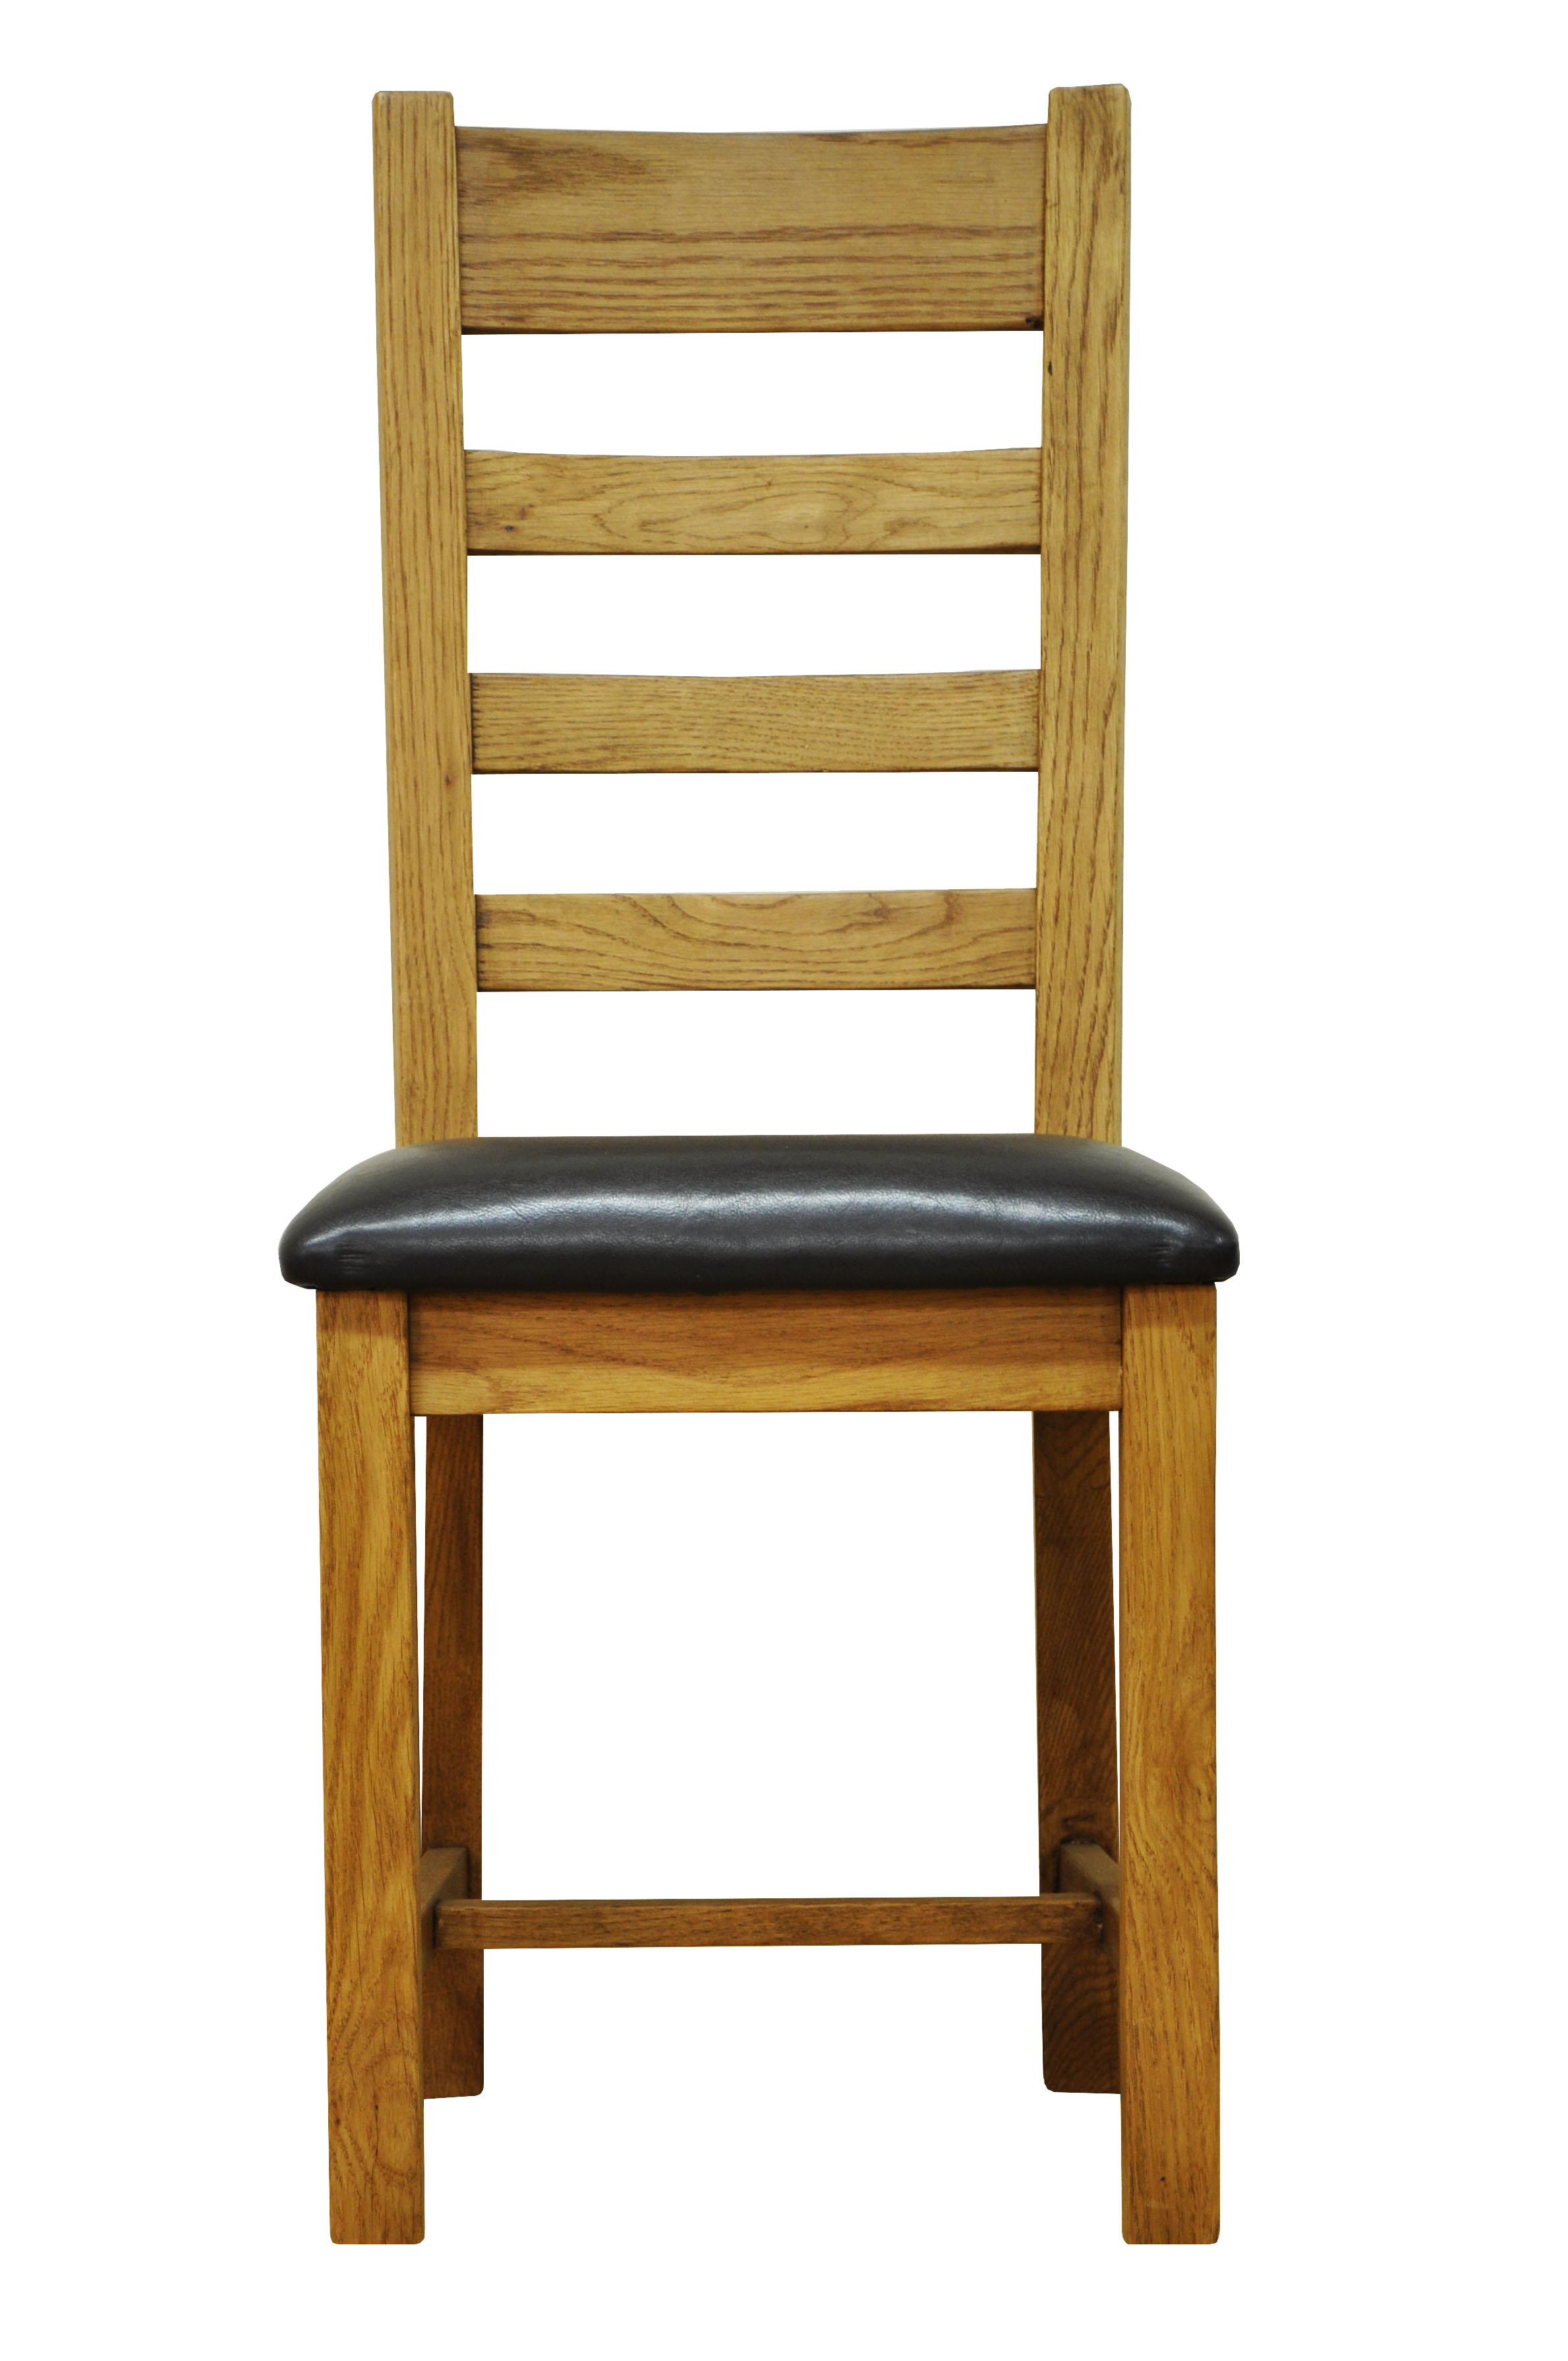 Kettle Stamford Ladder Back Chair PU Seat